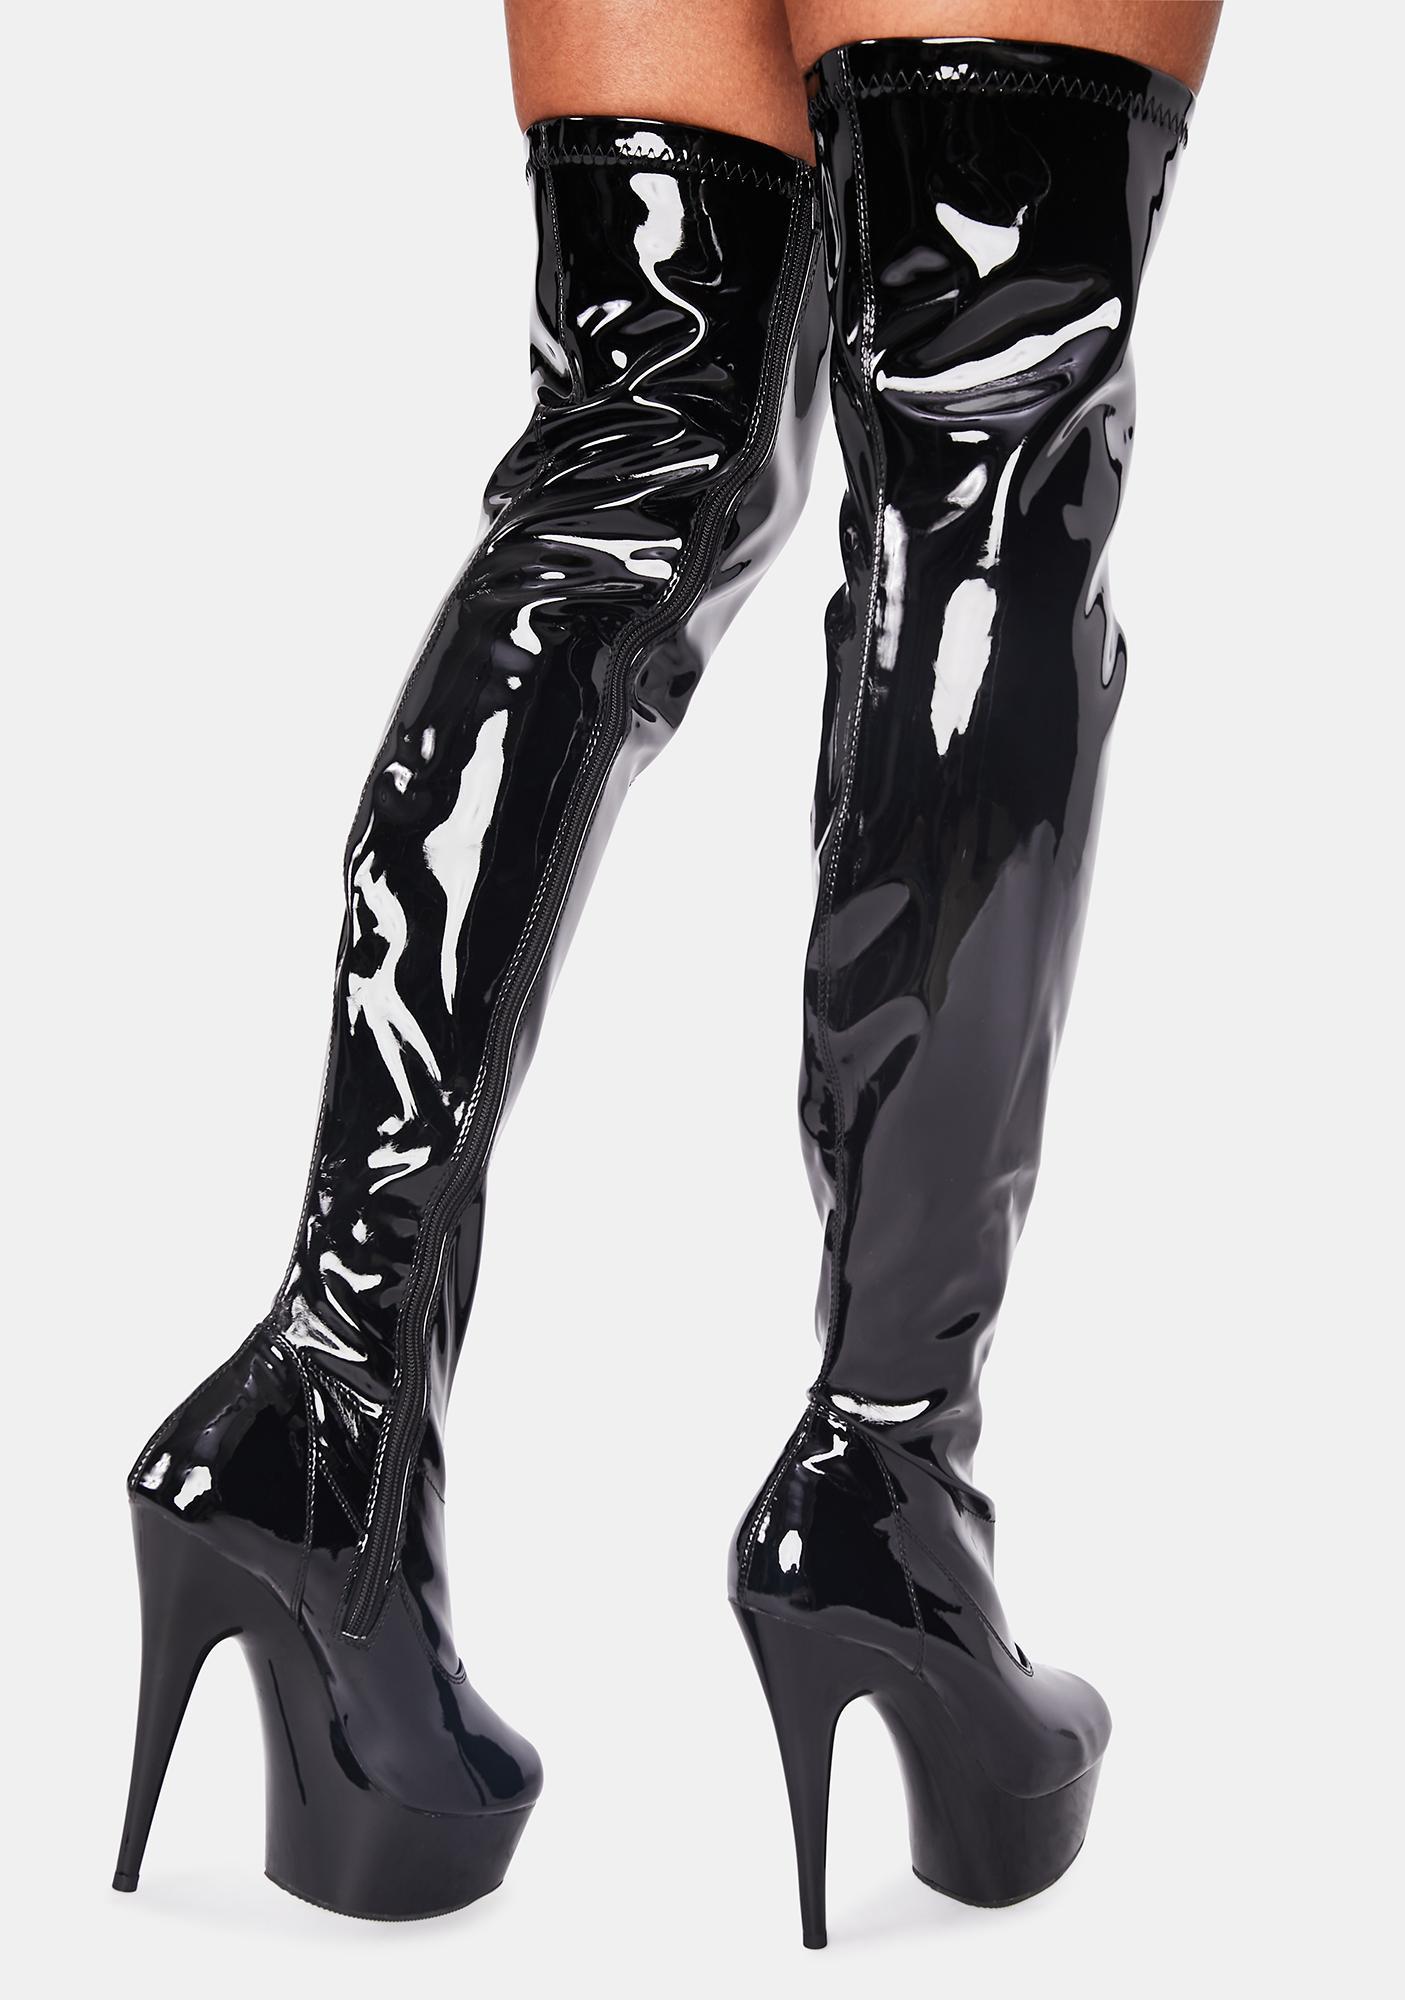 Pleaser Delight 3000 Patent Thigh High 